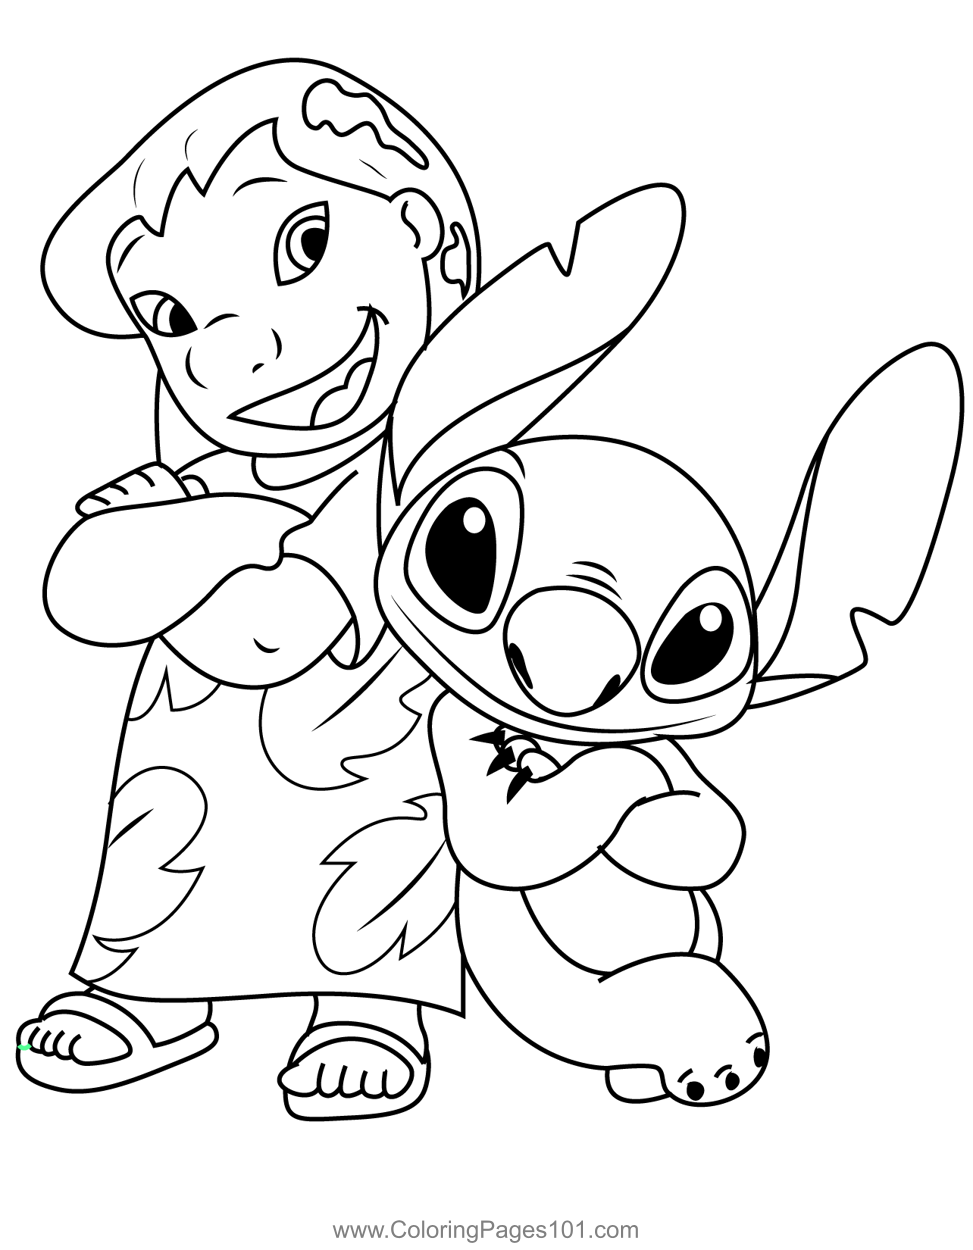 Lilo and Stitch Coloring Book - 80 Pages